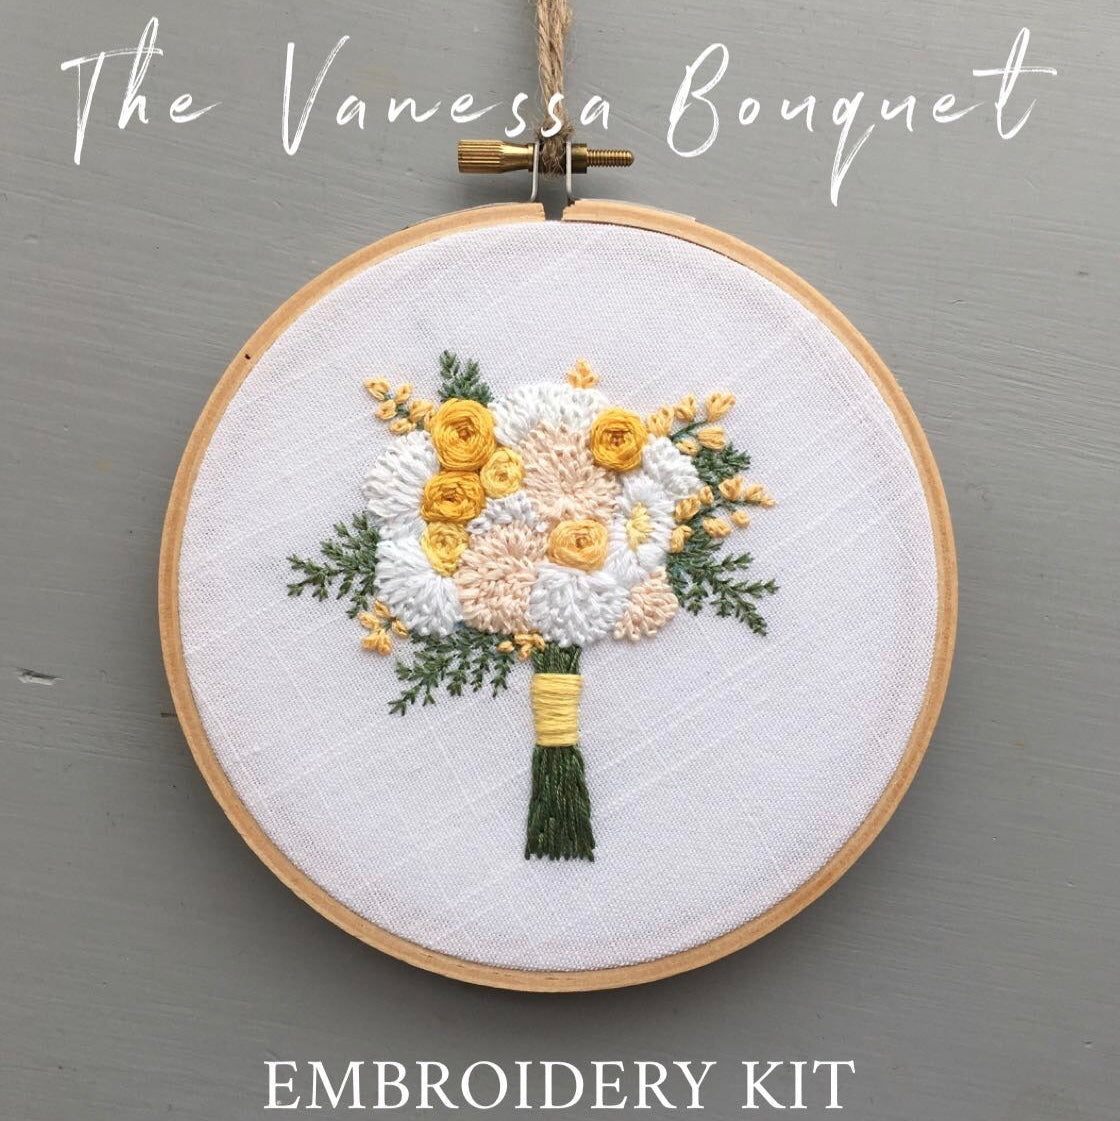 The Vanessa Bouquet - Hand Embroidery Kit - And Other Adventures